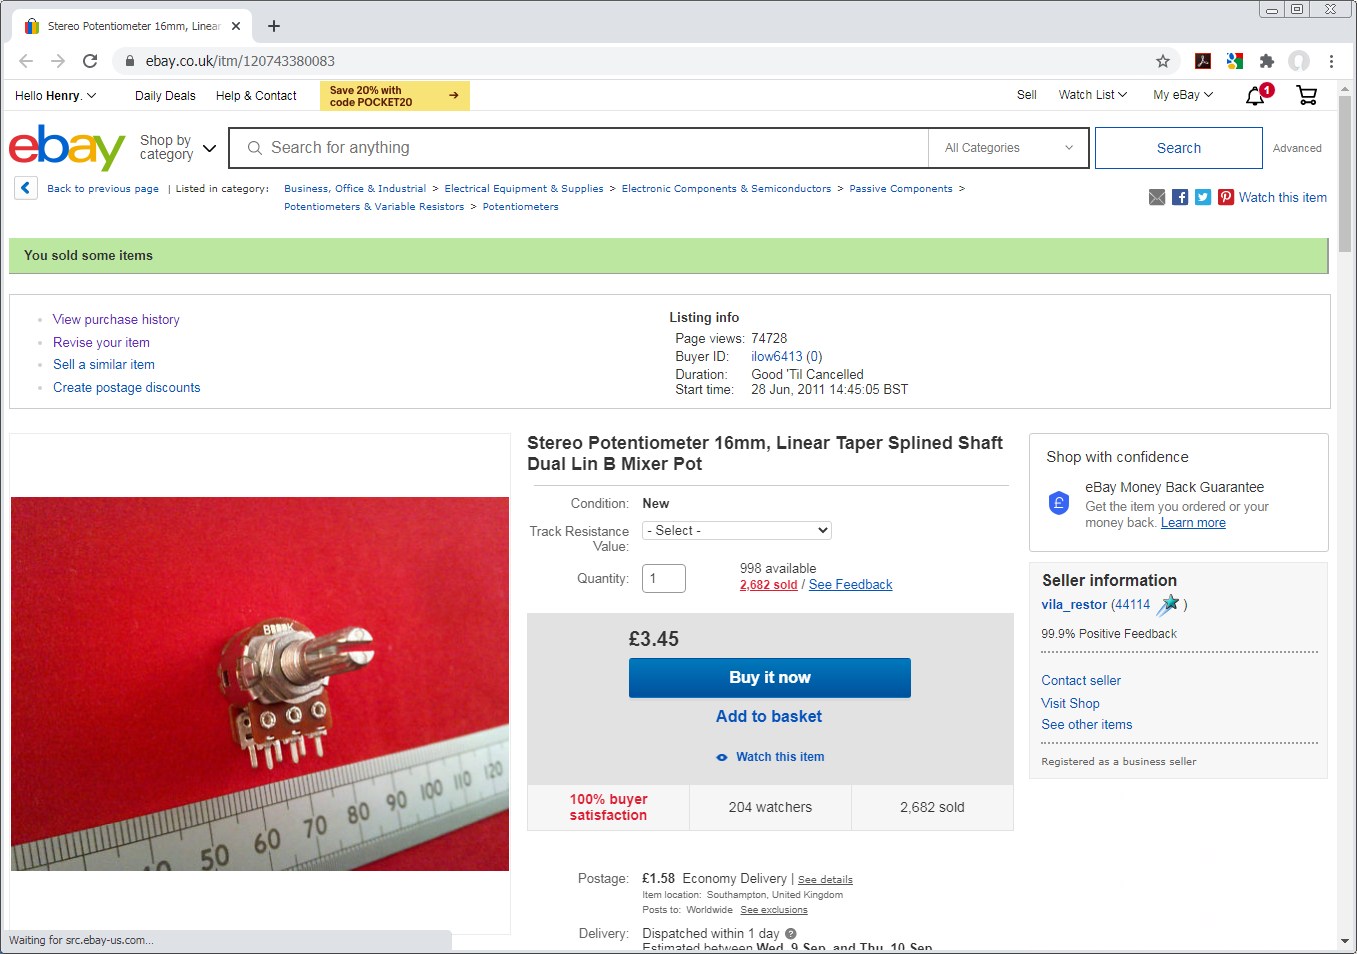 ebay multi-buy promotion
                  has mysteriously disappeared